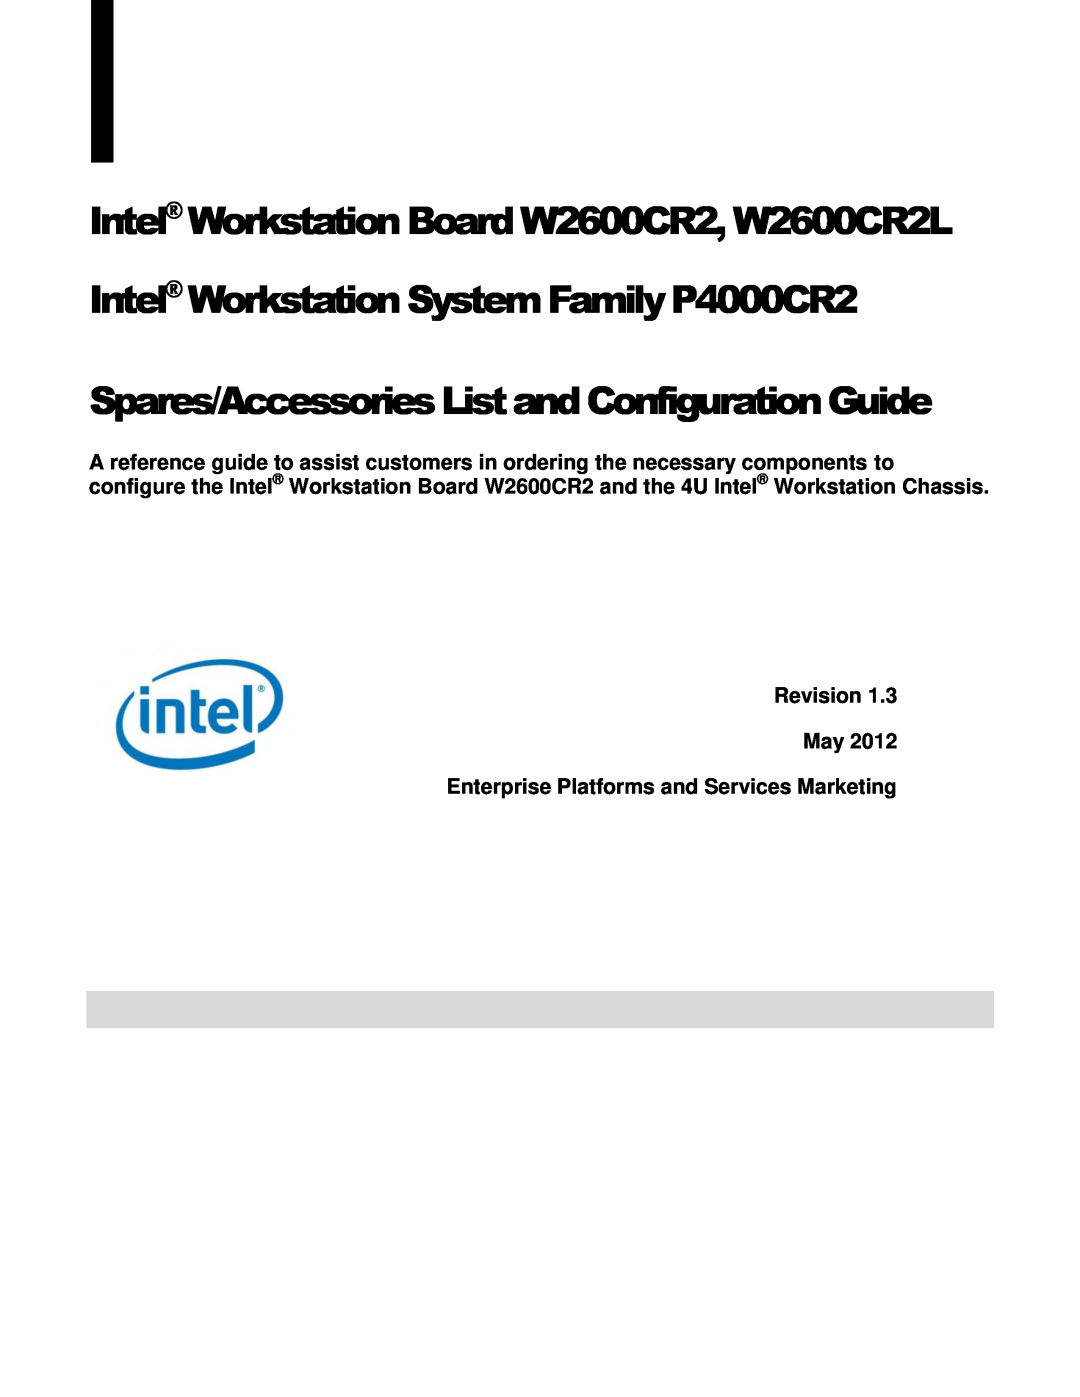 Intel W2600CR2 manual Revision May, Enterprise Platforms and Services Marketing 